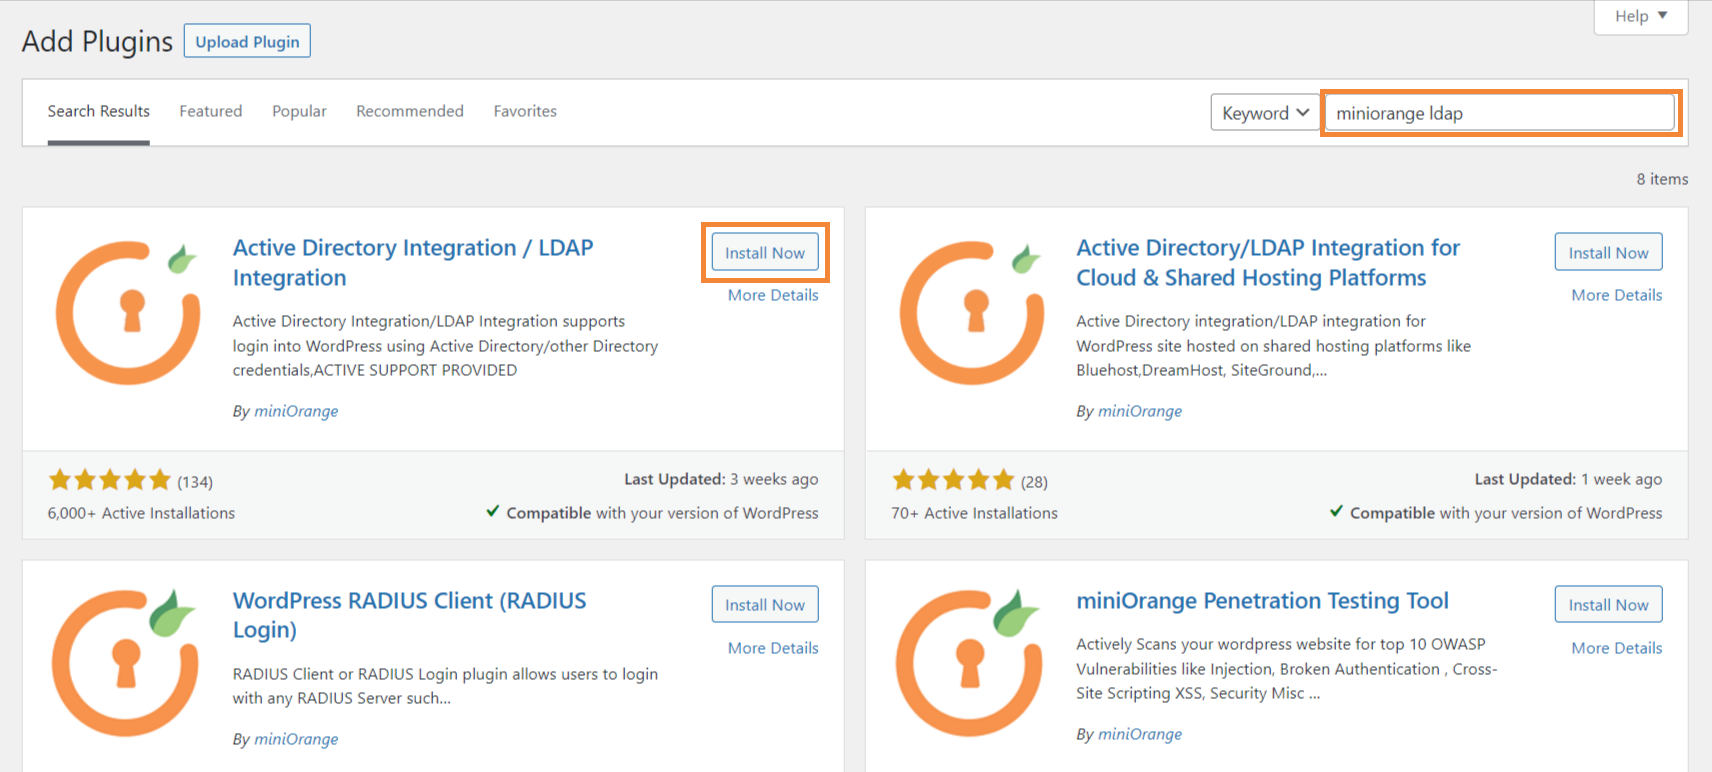 Search and Install the miniOrange active directory integration LDAP integration plugin